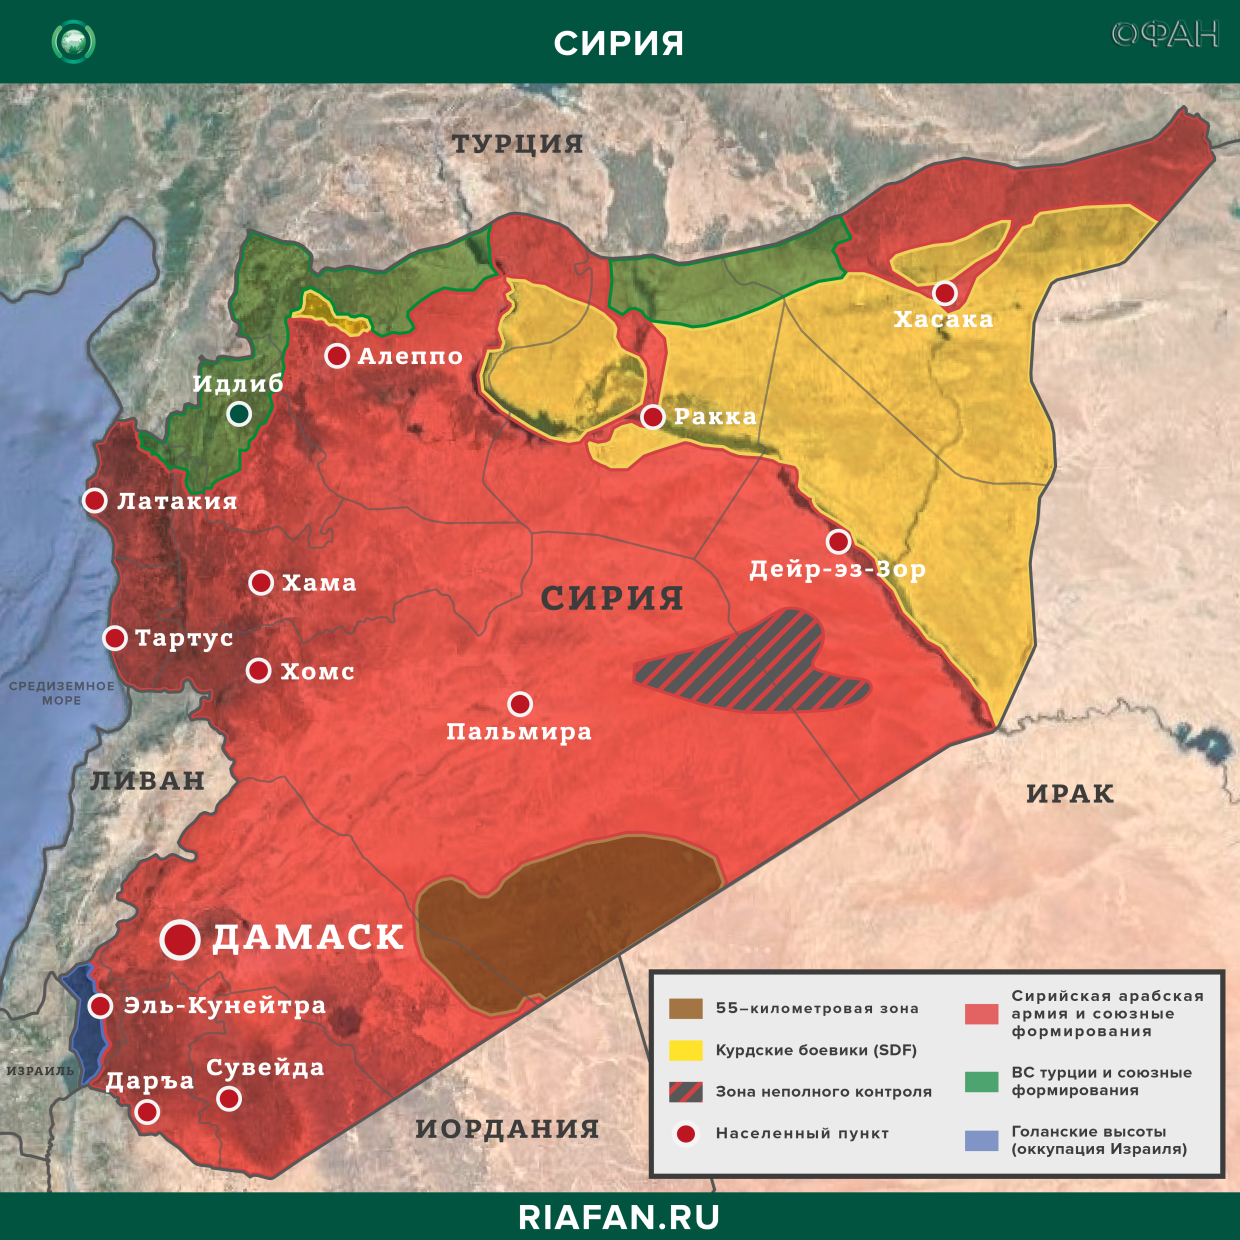 Syria the results of the day on 10 September 06.00: Turkish Armed Forces General Erdogan dies in Idlib